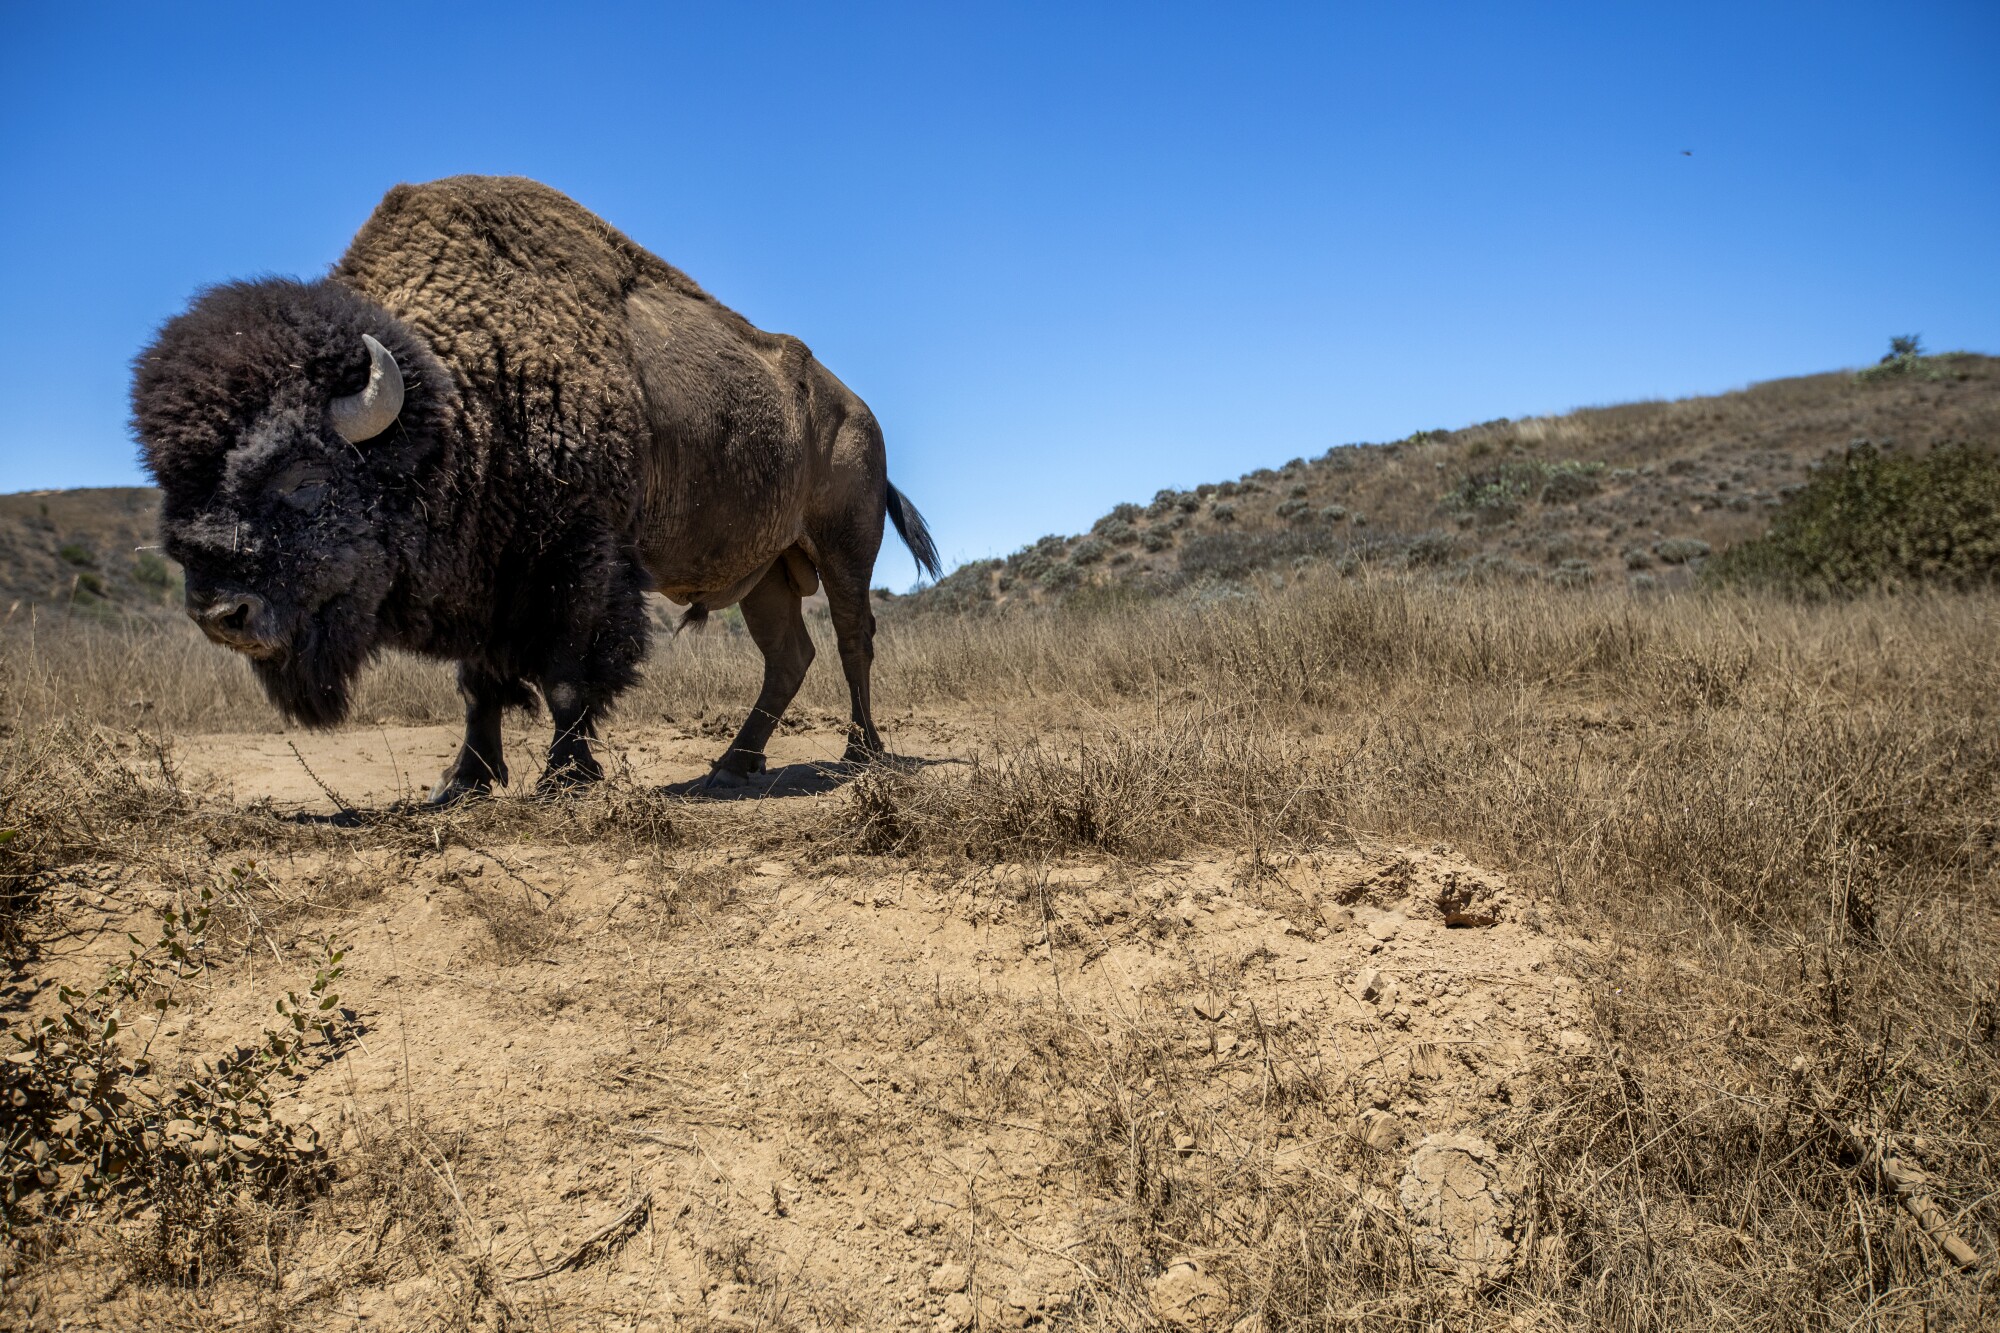 A bison stands on dry dirt in Catalina